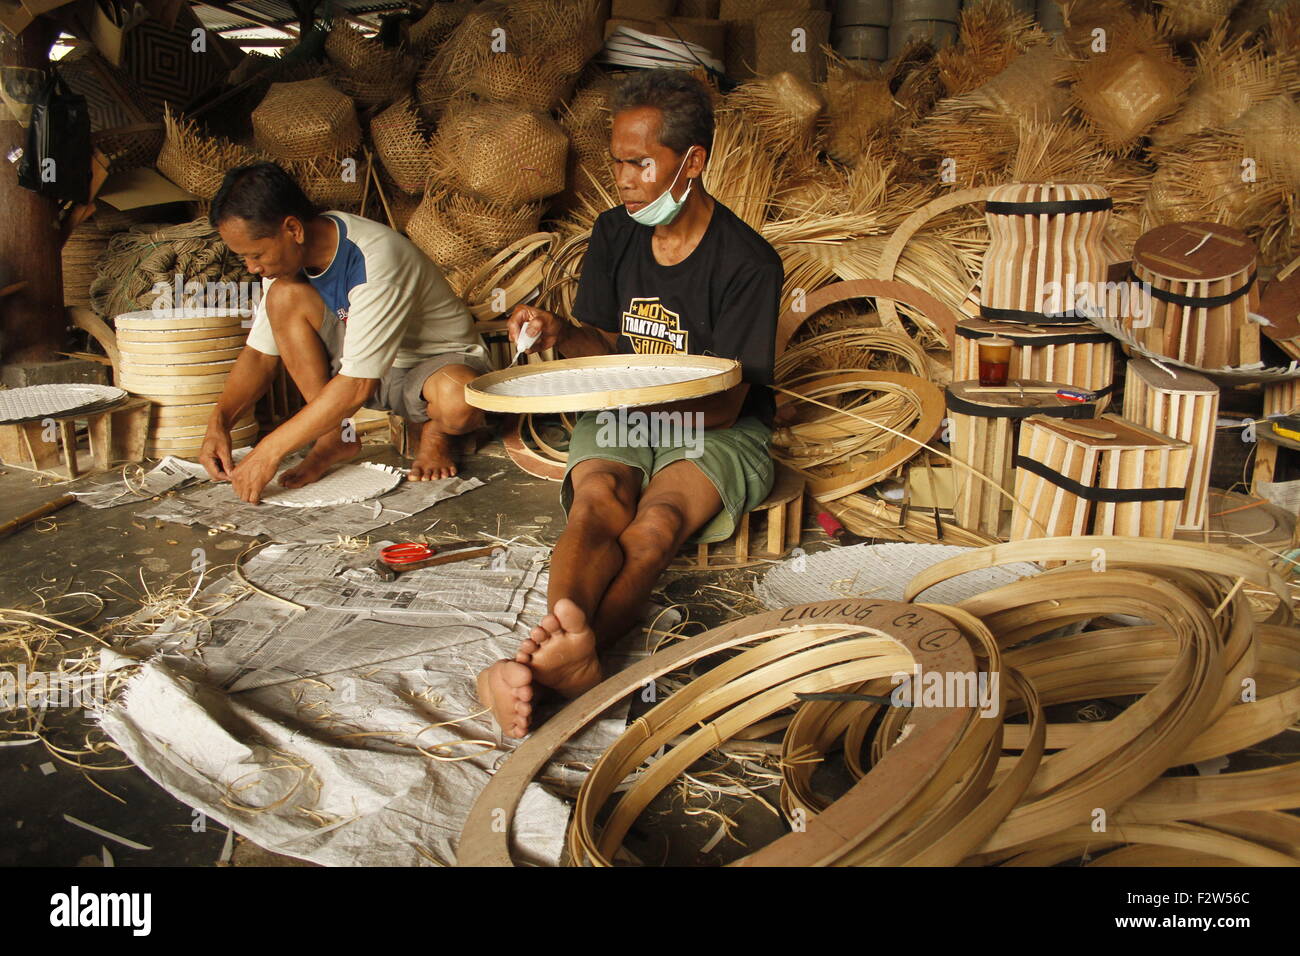 indonesia craftsmen making bamboo handicraft products to maintain a